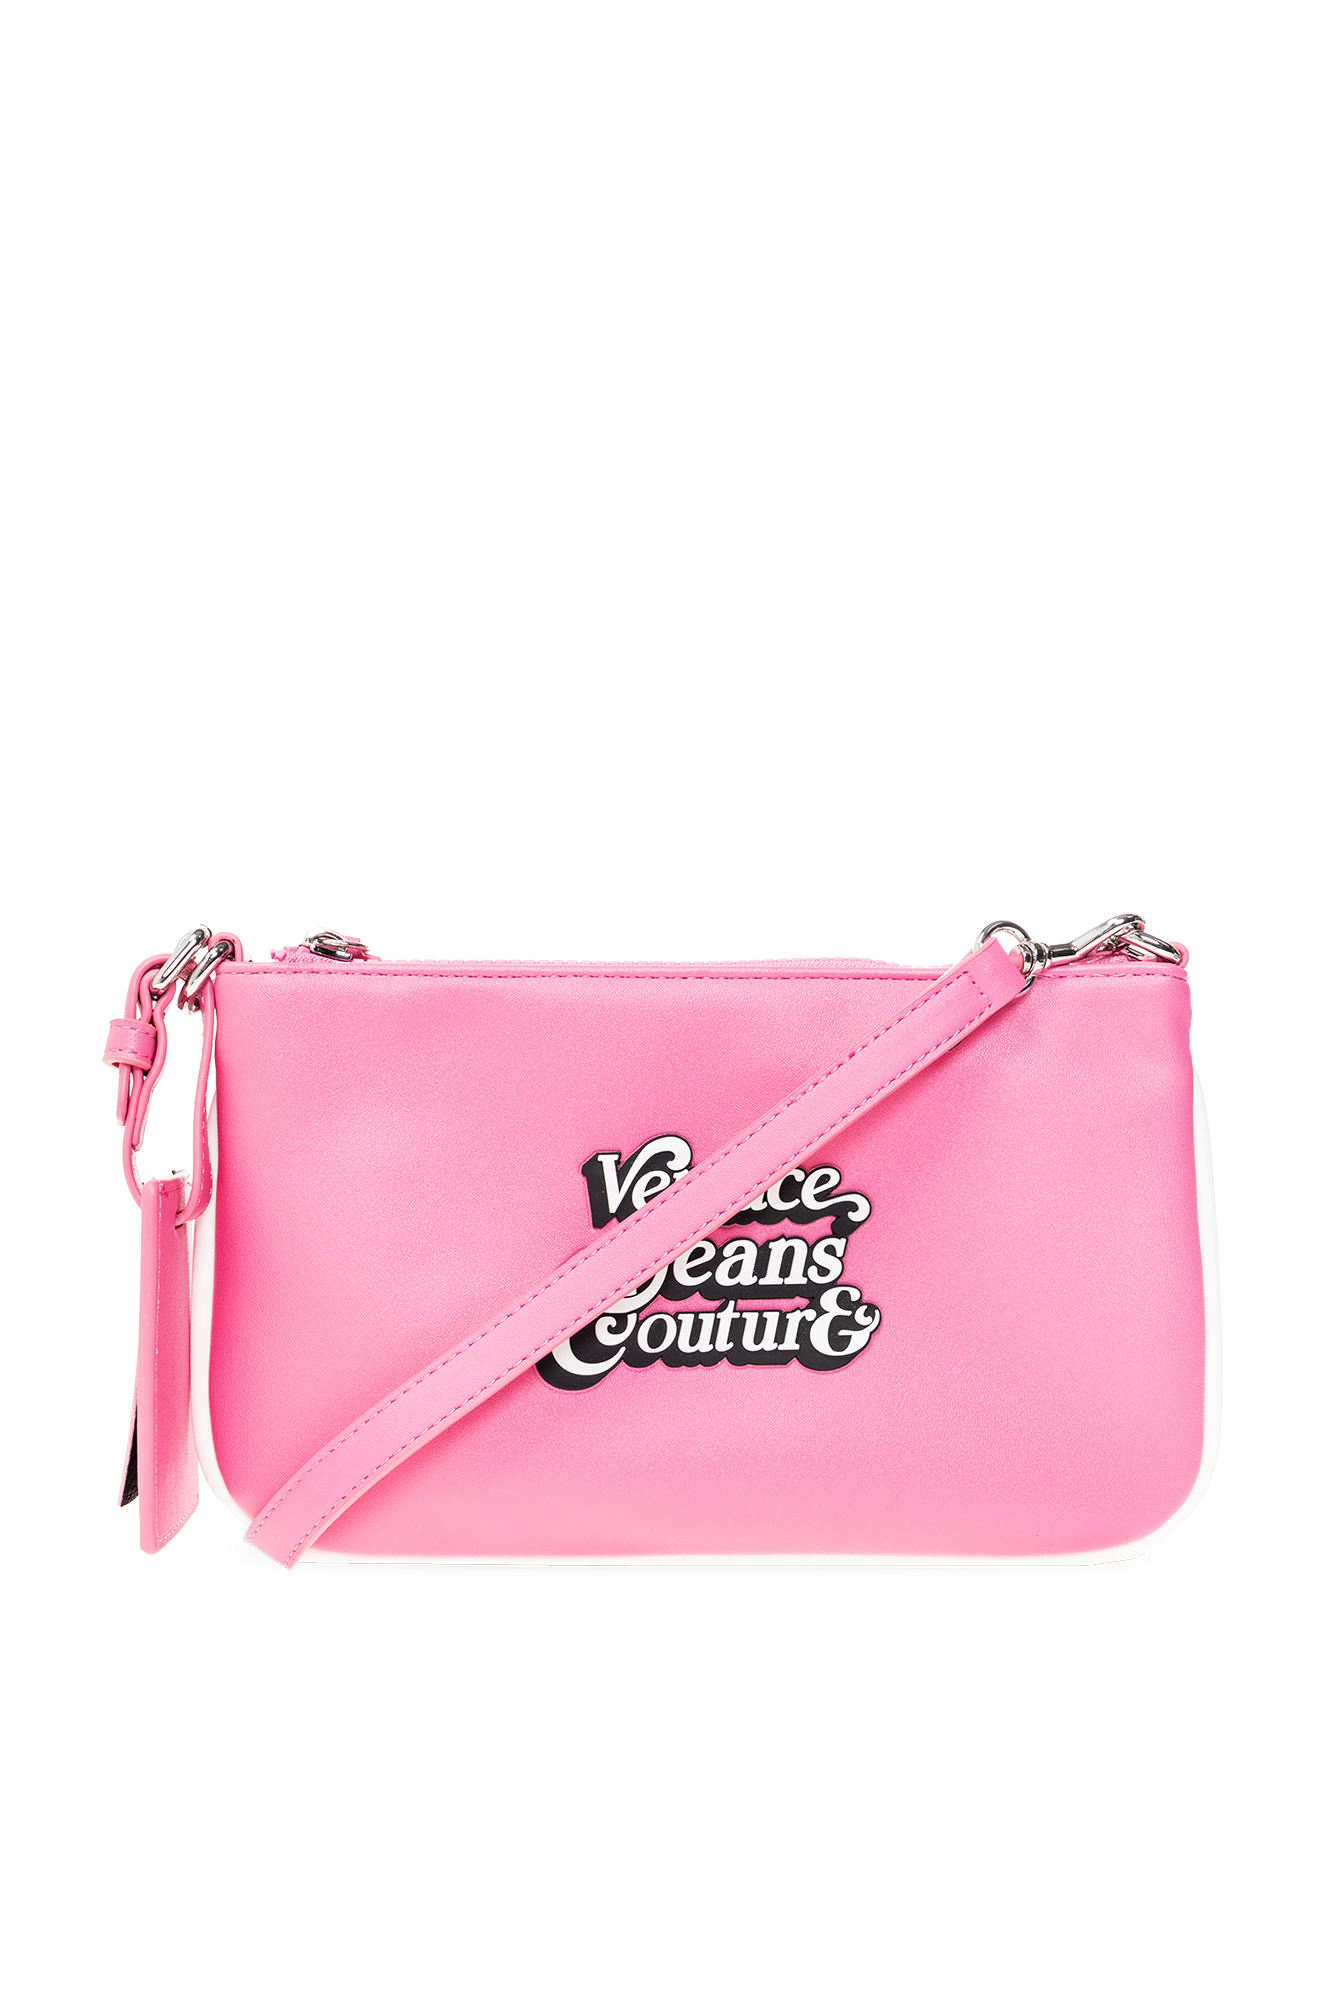 Pink Shoulder bag with logo Versace Jeans Couture - Vitkac Germany